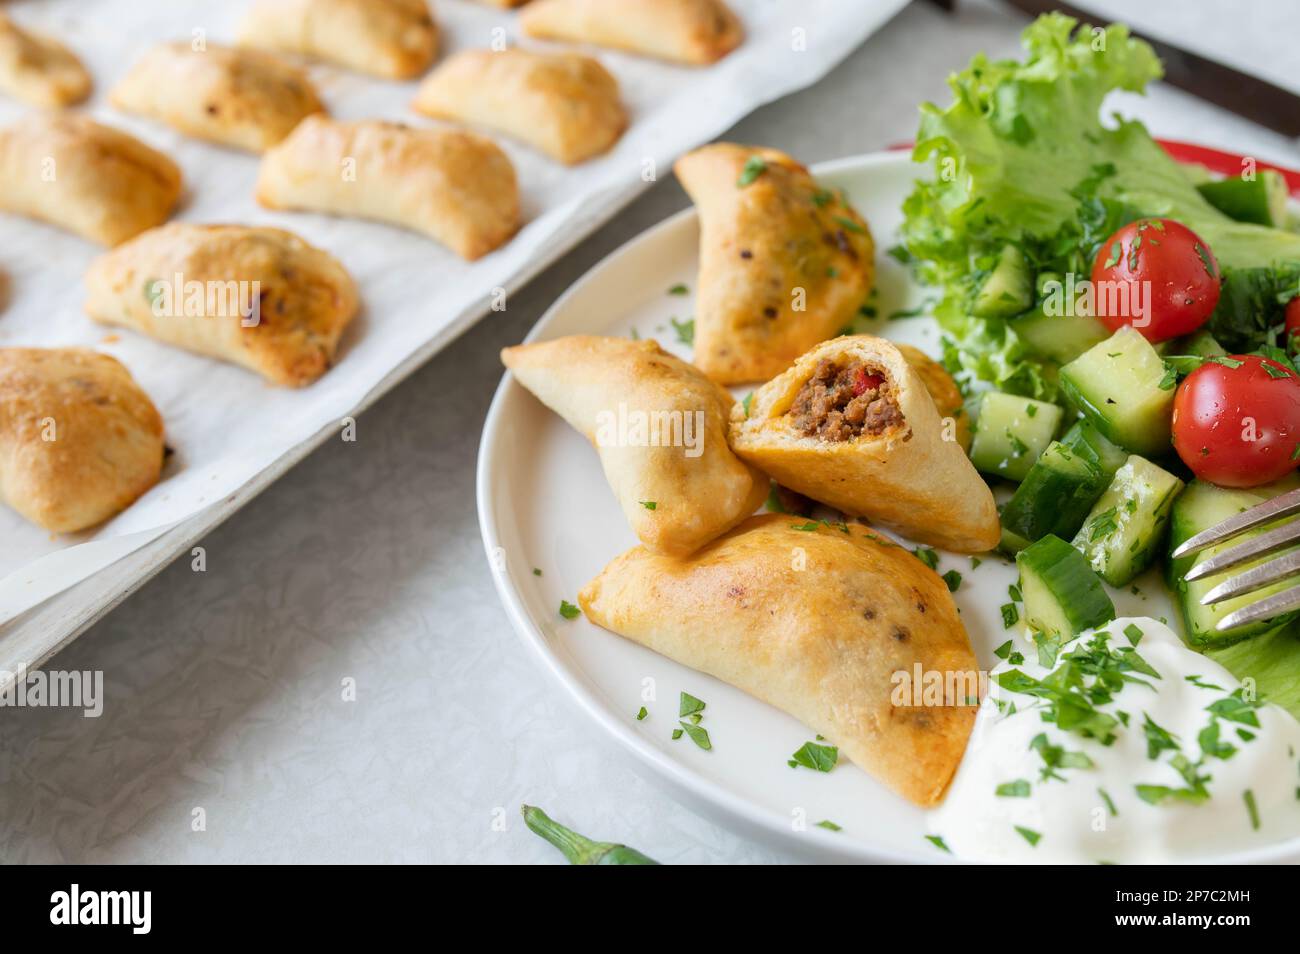 Empanadas with ground beef, cheese filling and side salad Stock Photo